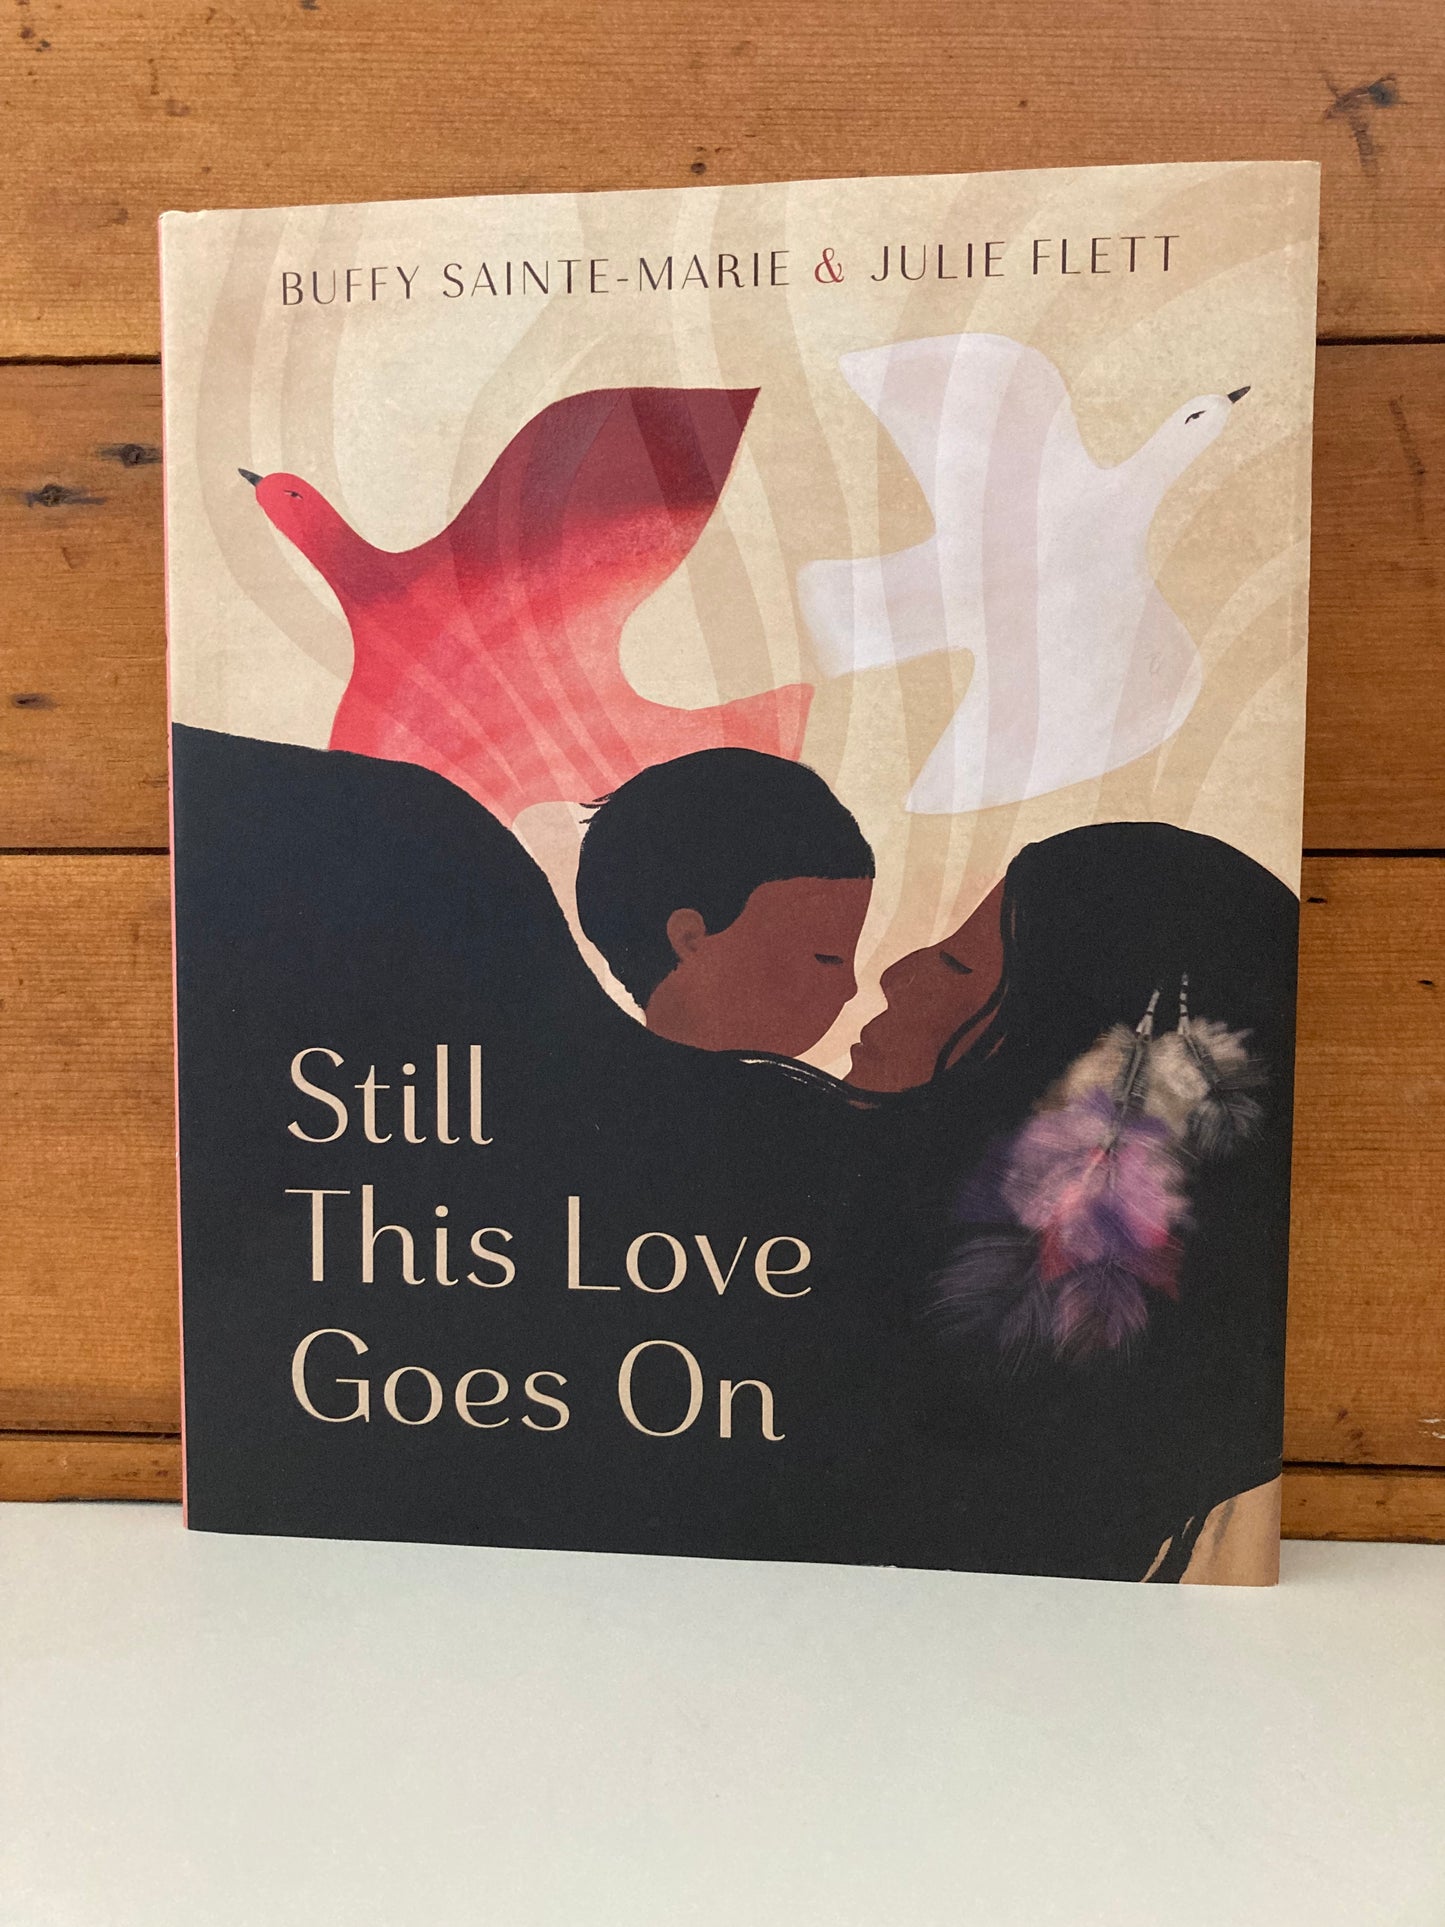 Children’s Picture Book - STILL THIS LOVE GOES ON